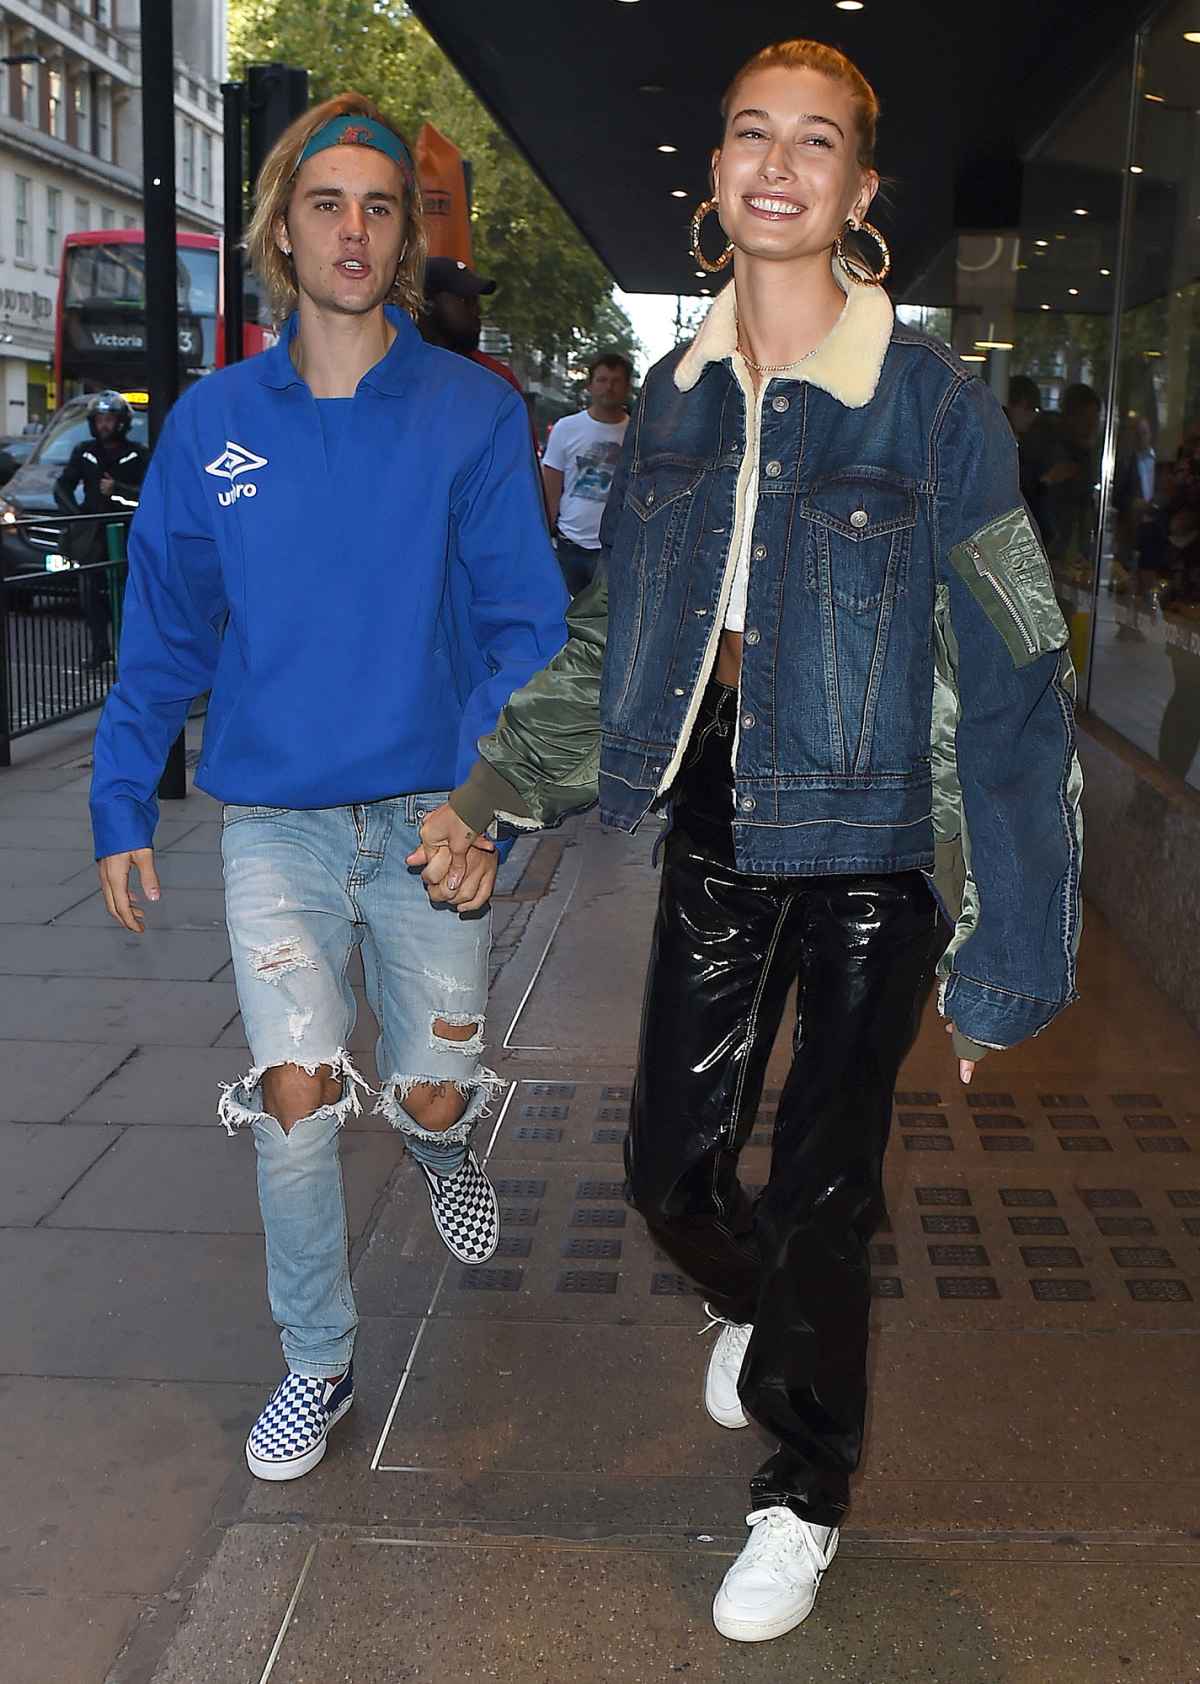 Justin Bieber Makes Wife Hailey Bieber The Sweetest Necklace, Hailey Bieber